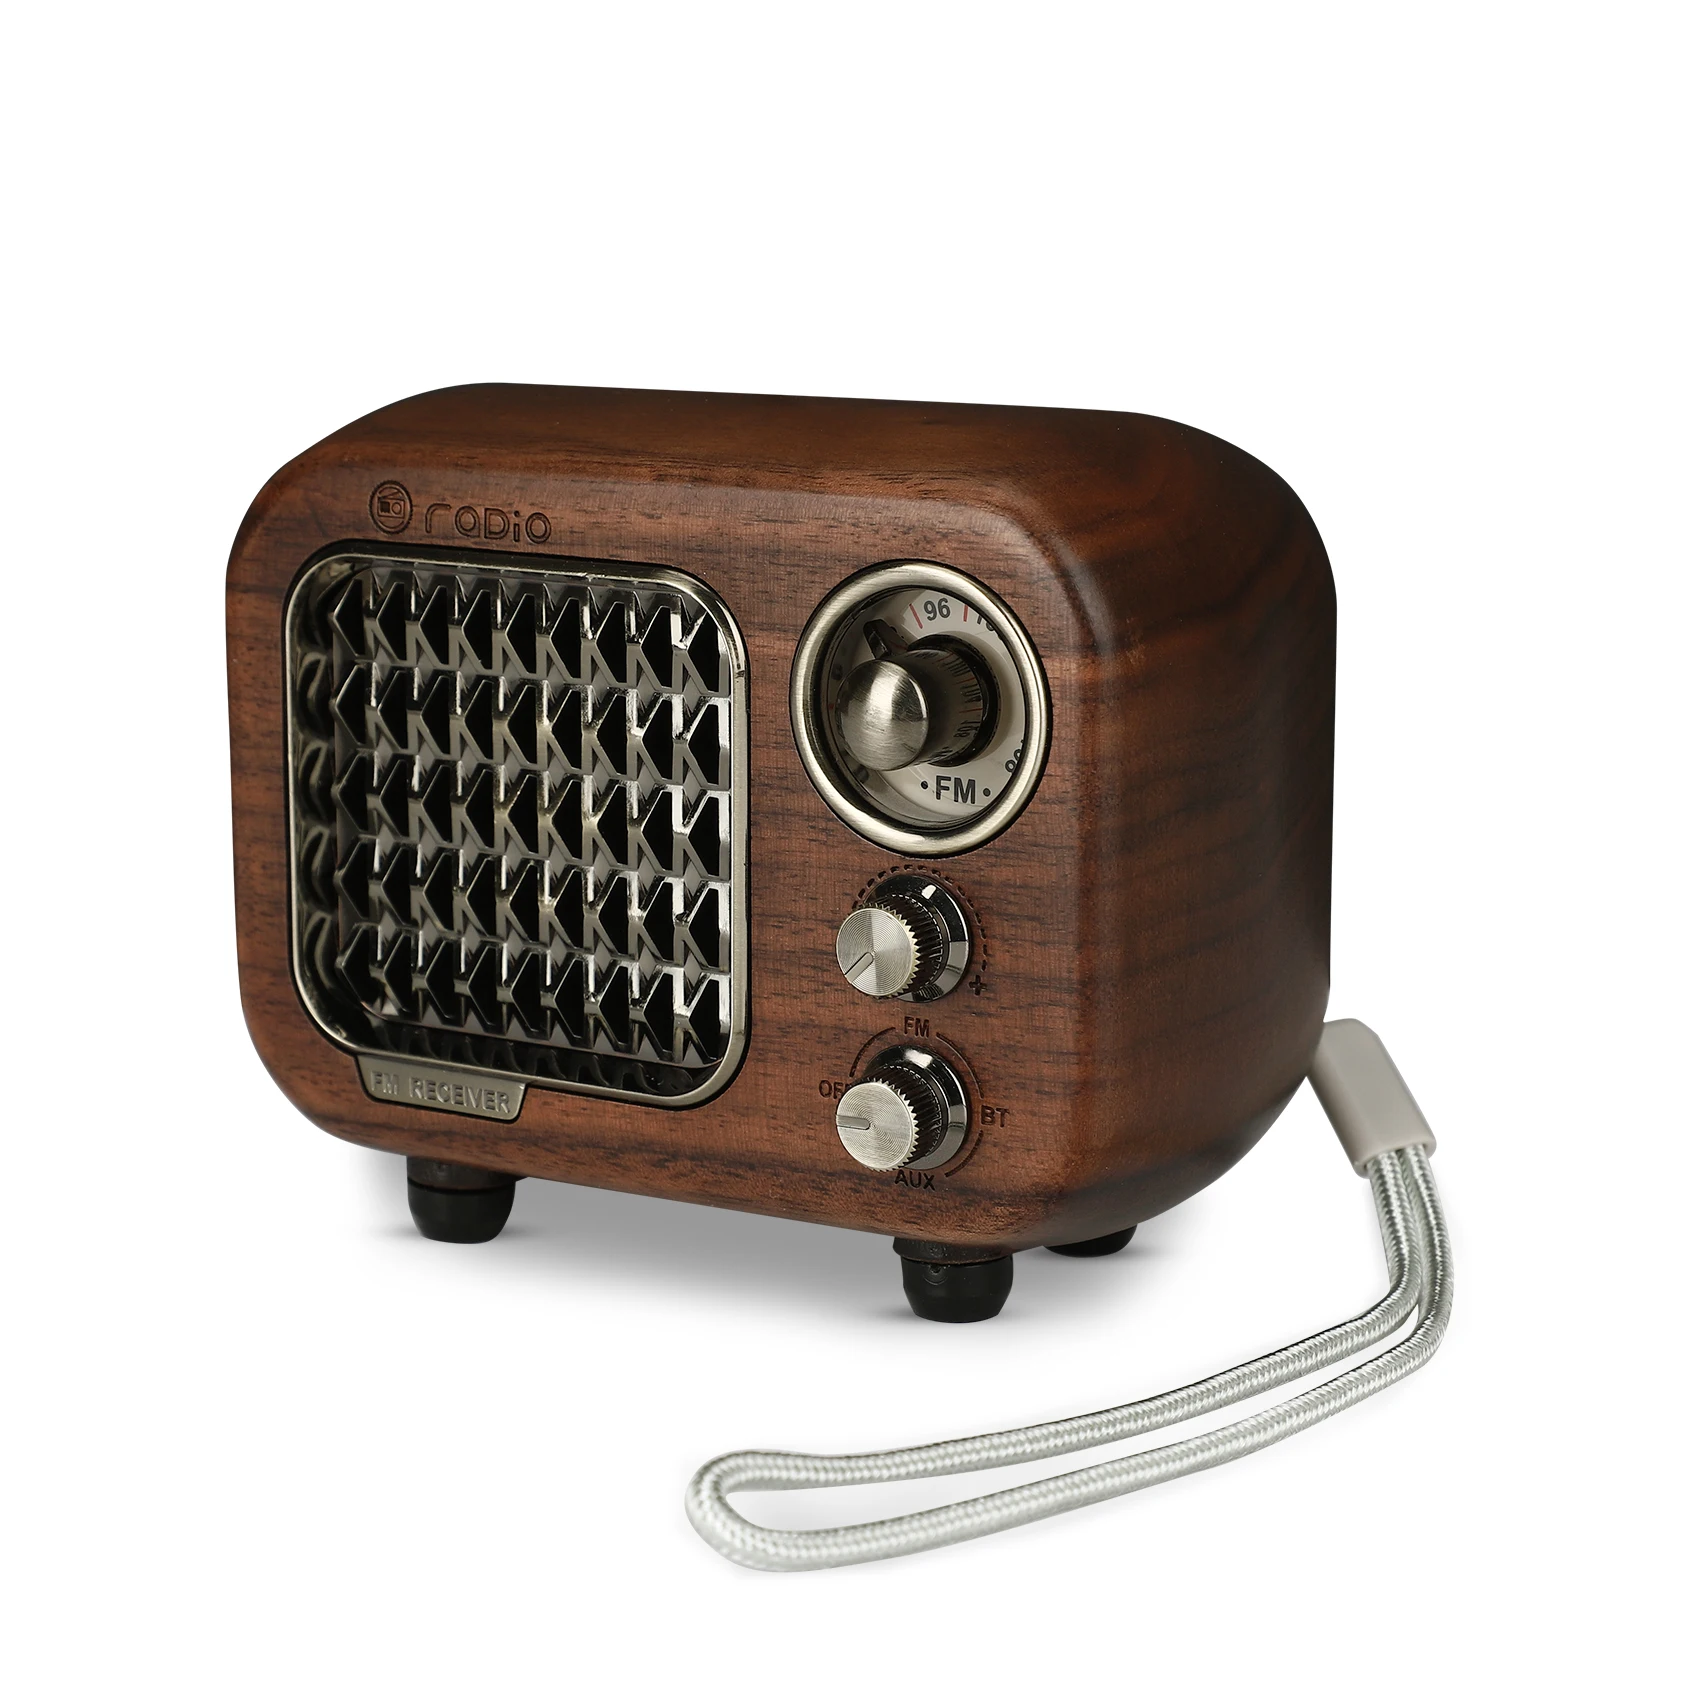 Retro Bluetooth Speaker, Vintage Radio-Greadio FM Radio with Old Fashioned  Classic Style, Strong Bass Enhancement, Loud Volume, Bluetooth 5.0 Wireless